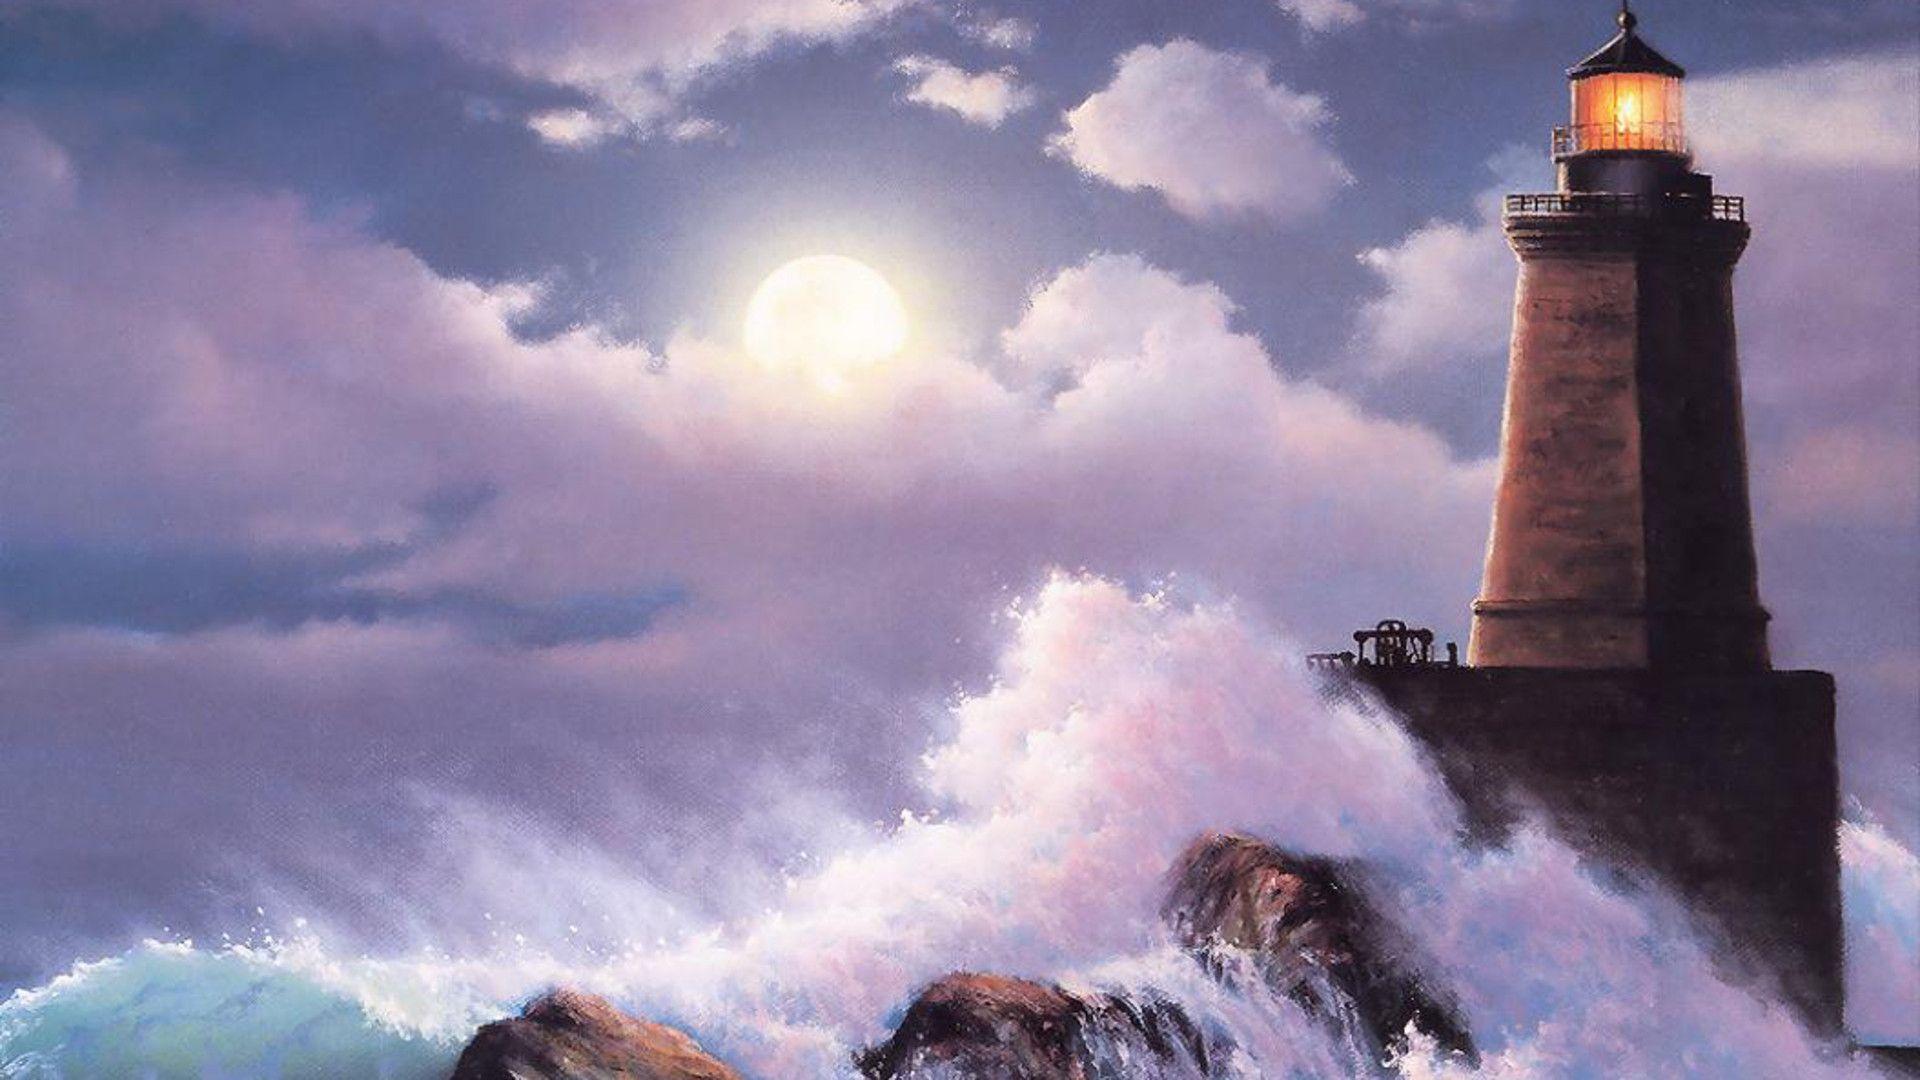 HD Lighthouse In Storm Wallpaper